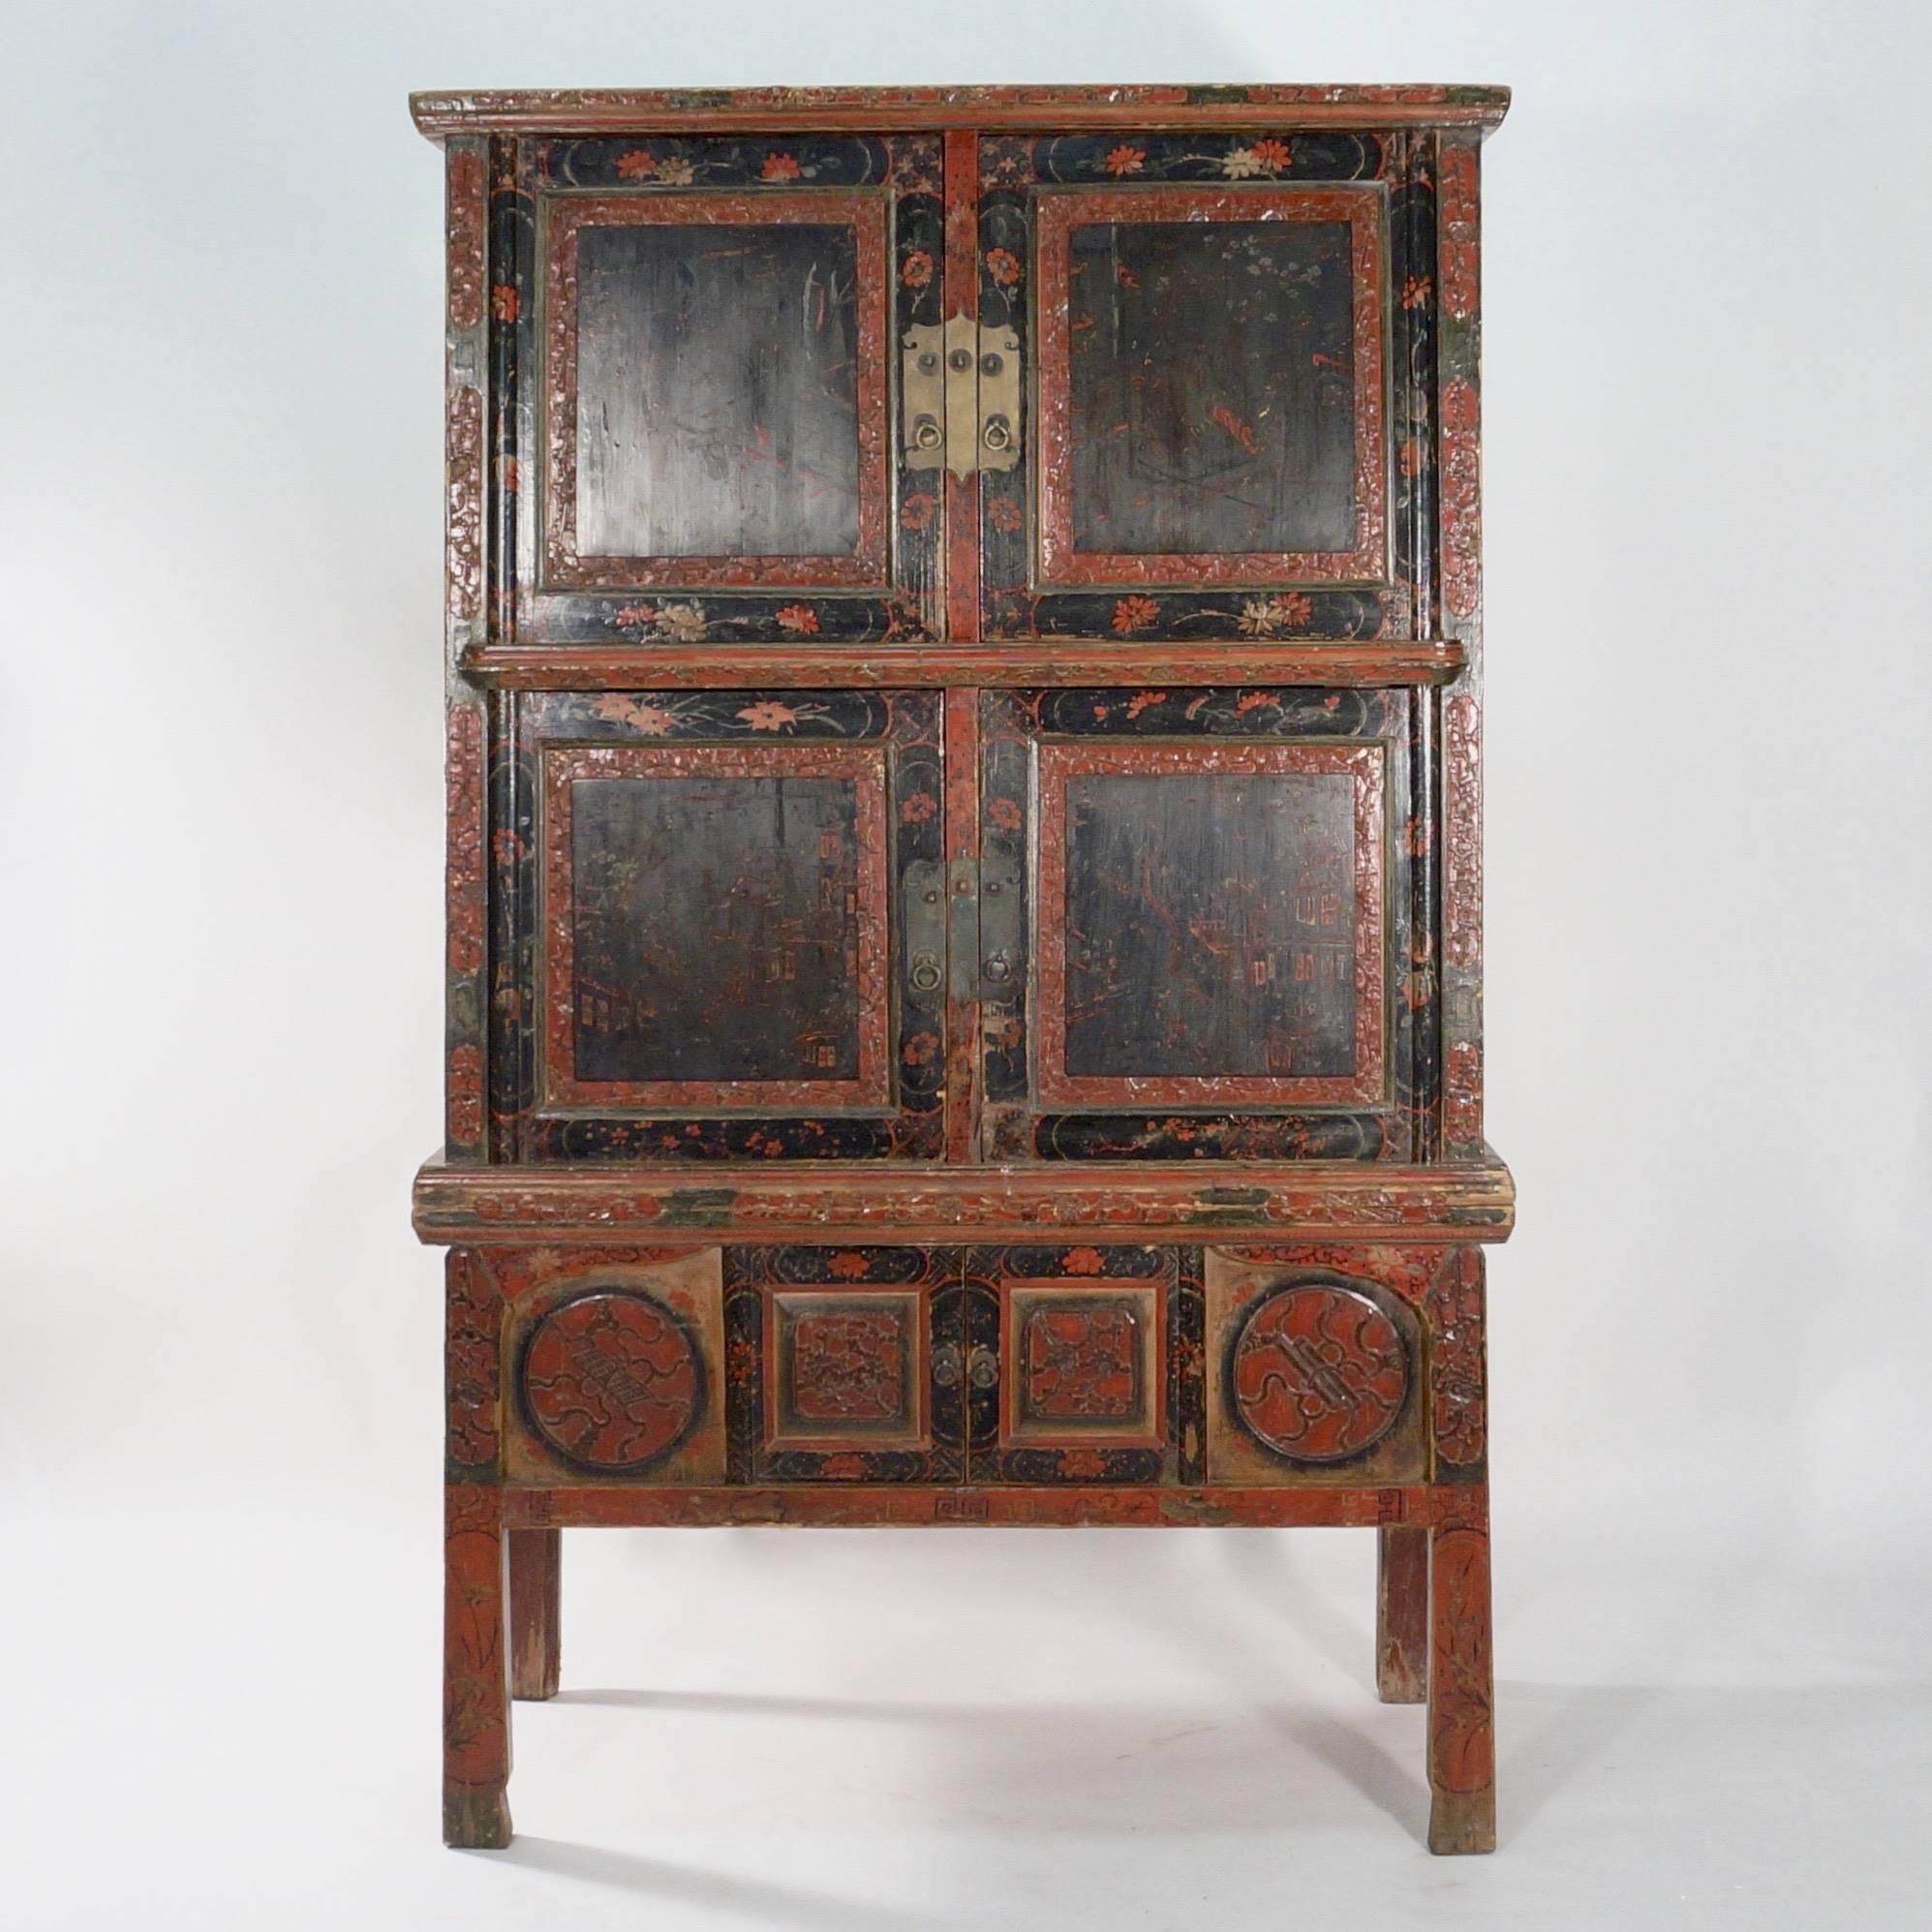 With four-panelled cupboard doors decorated with chinoiserie scenes in black and red lacquer with carved fillets and floral borders. The lower section with four legs supporting a cupboard to the apron flanked by roundels.

China, circa 1900.